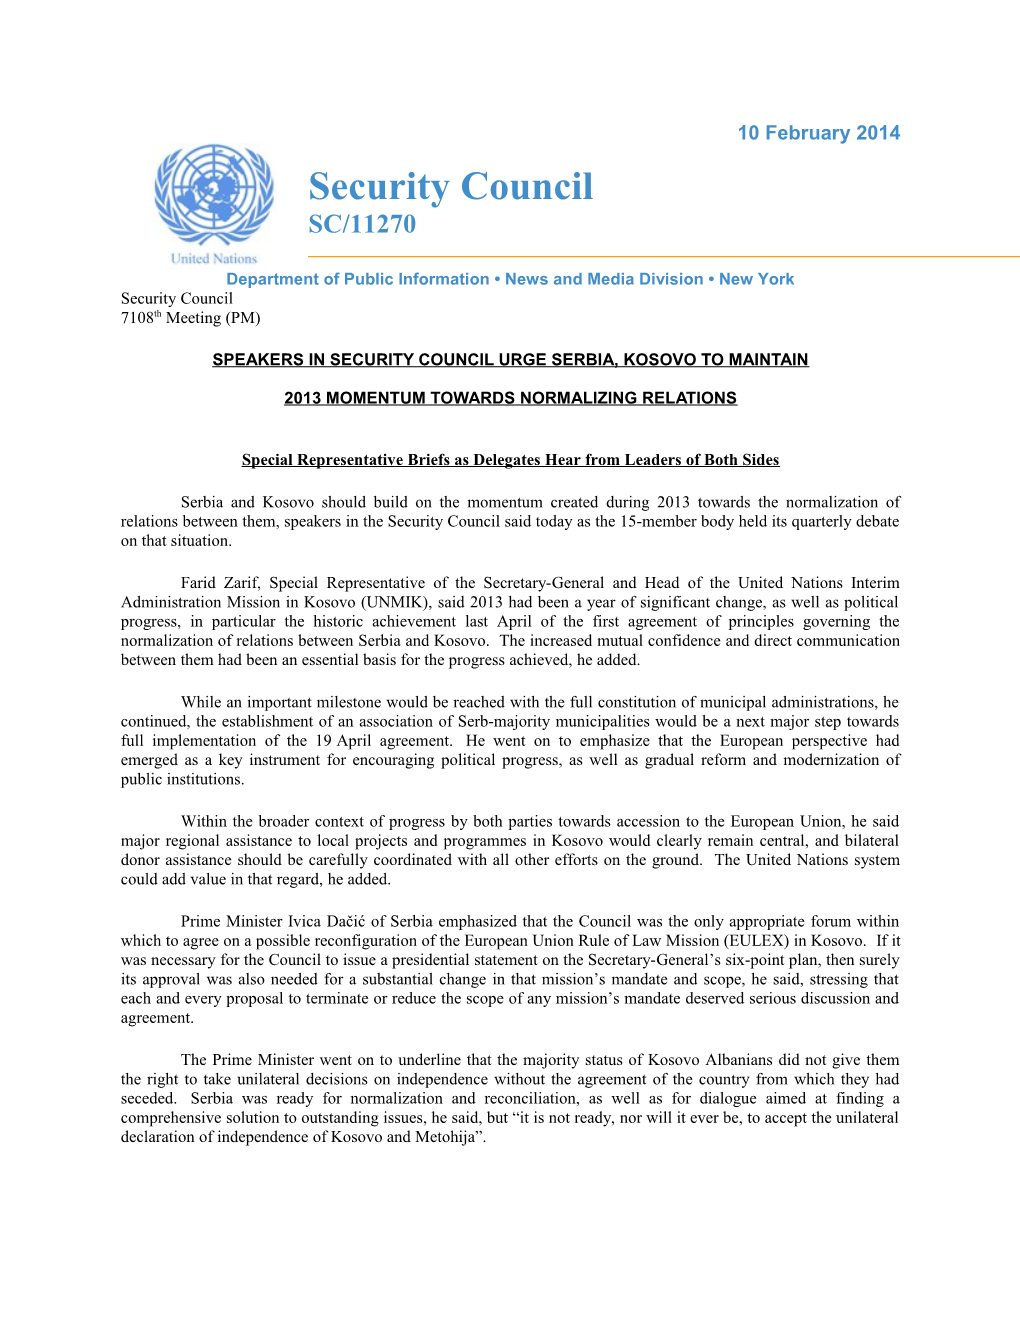 10/02/2014 - Speakers in Security Council Urge Serbia, Kosovo to Maintain